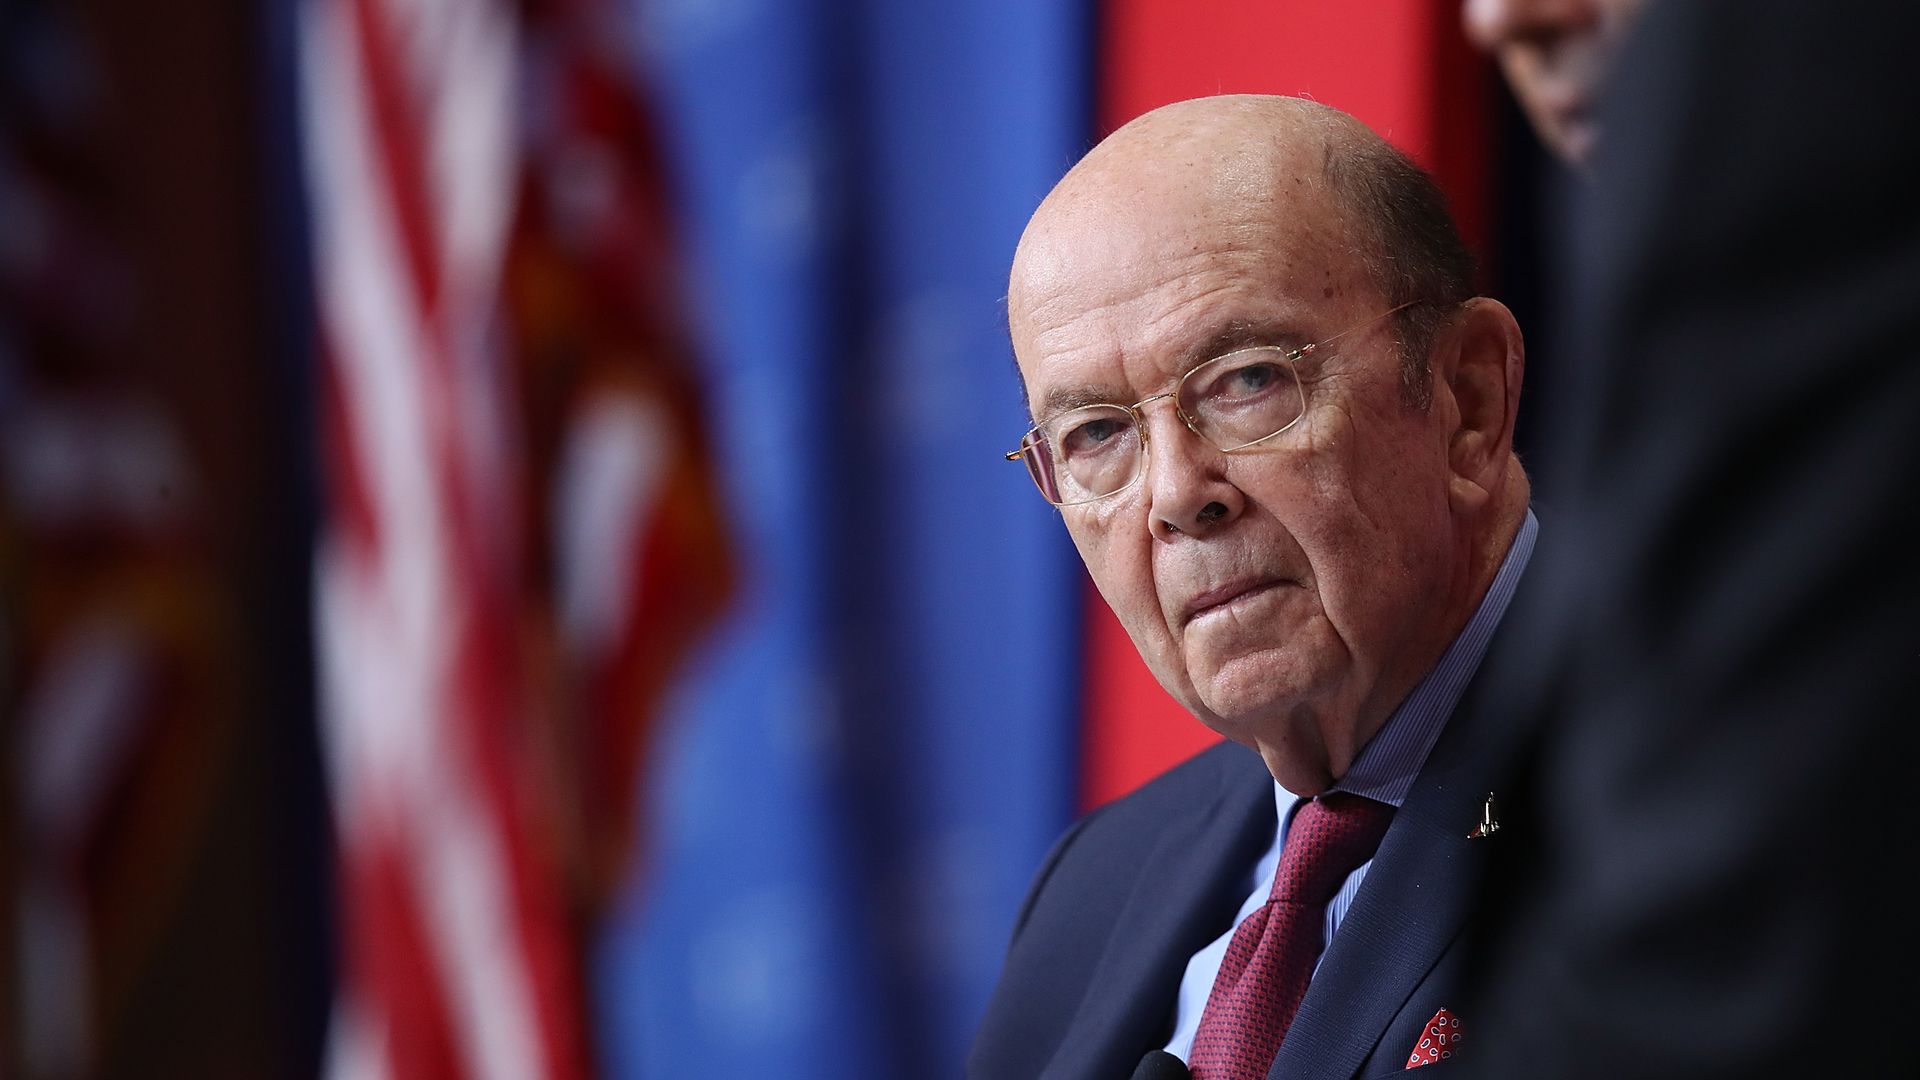 Wilbur Ross in front of an American flag